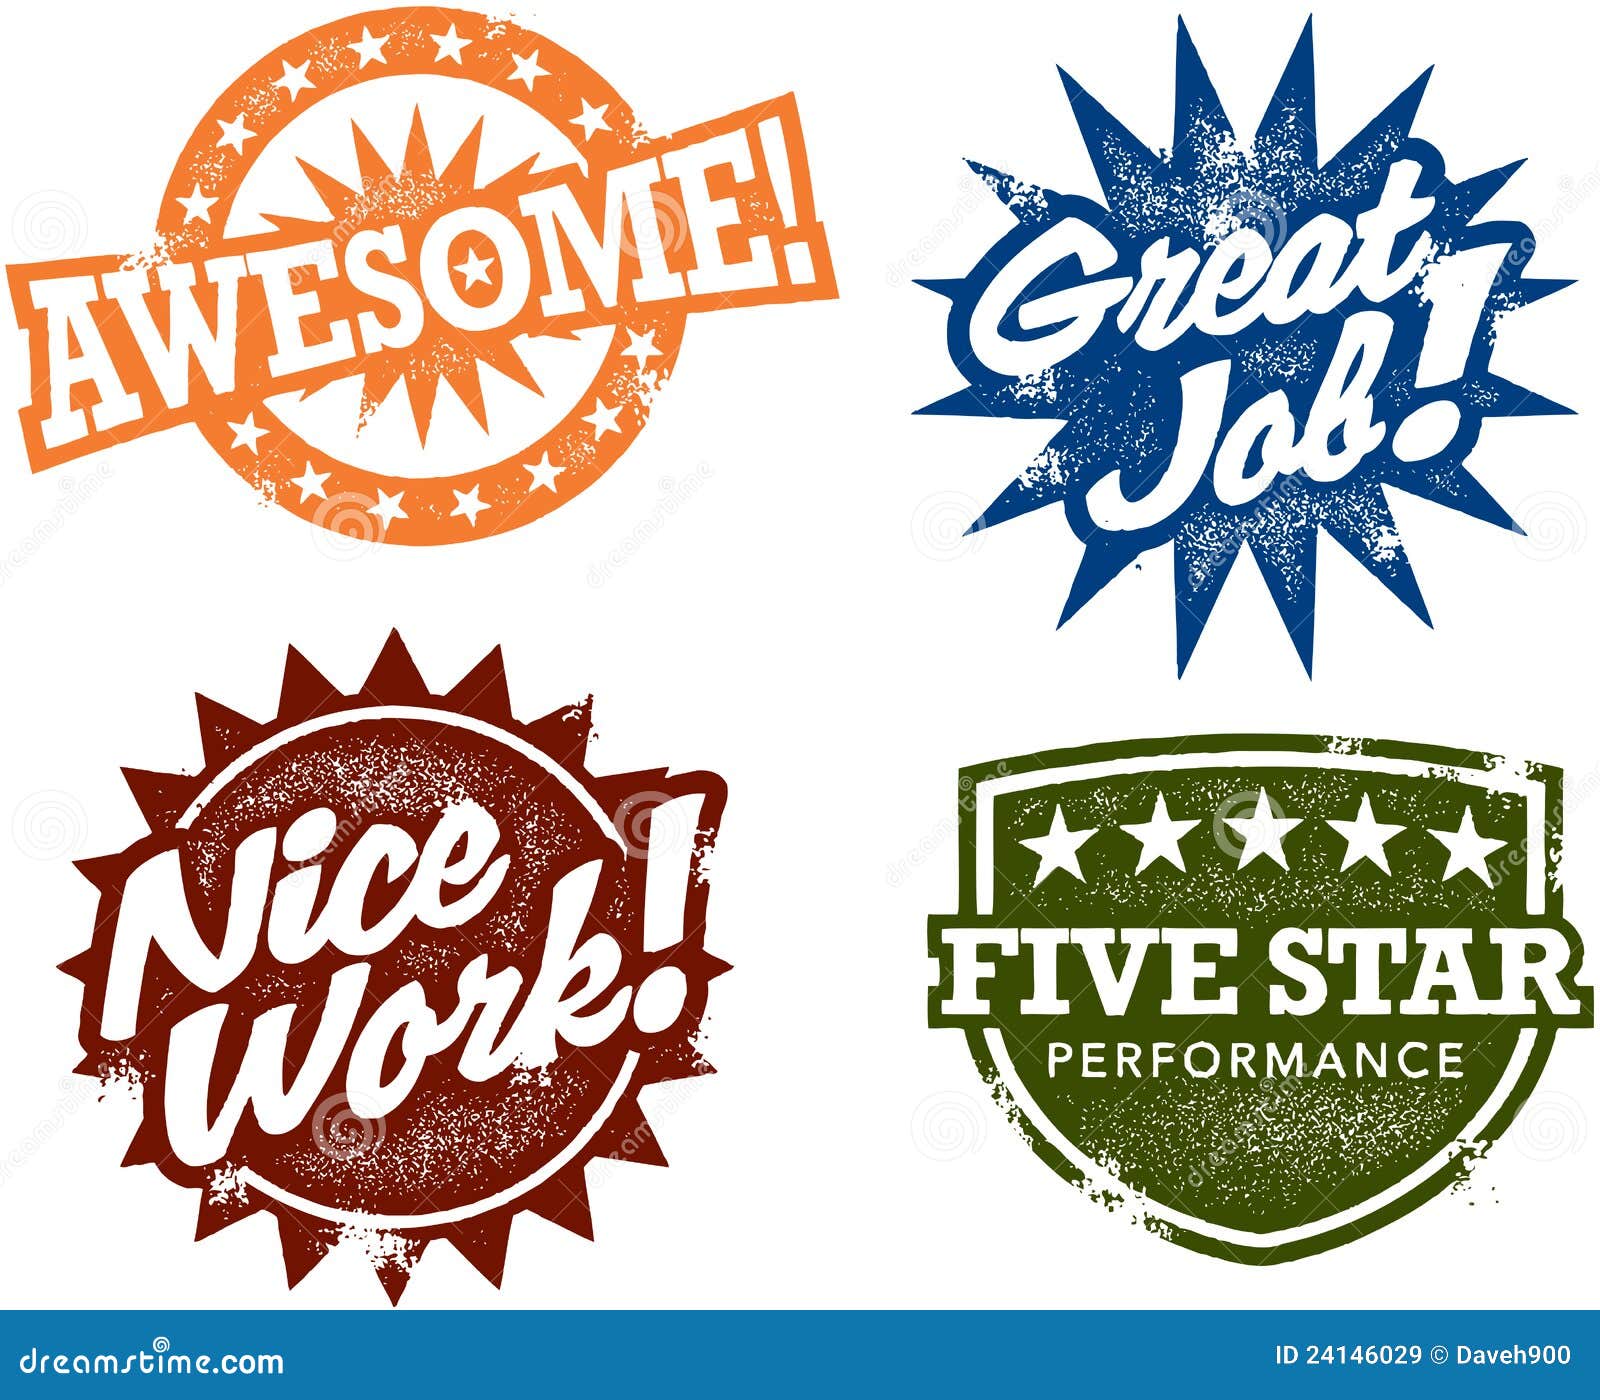 awesome performance reward stamps